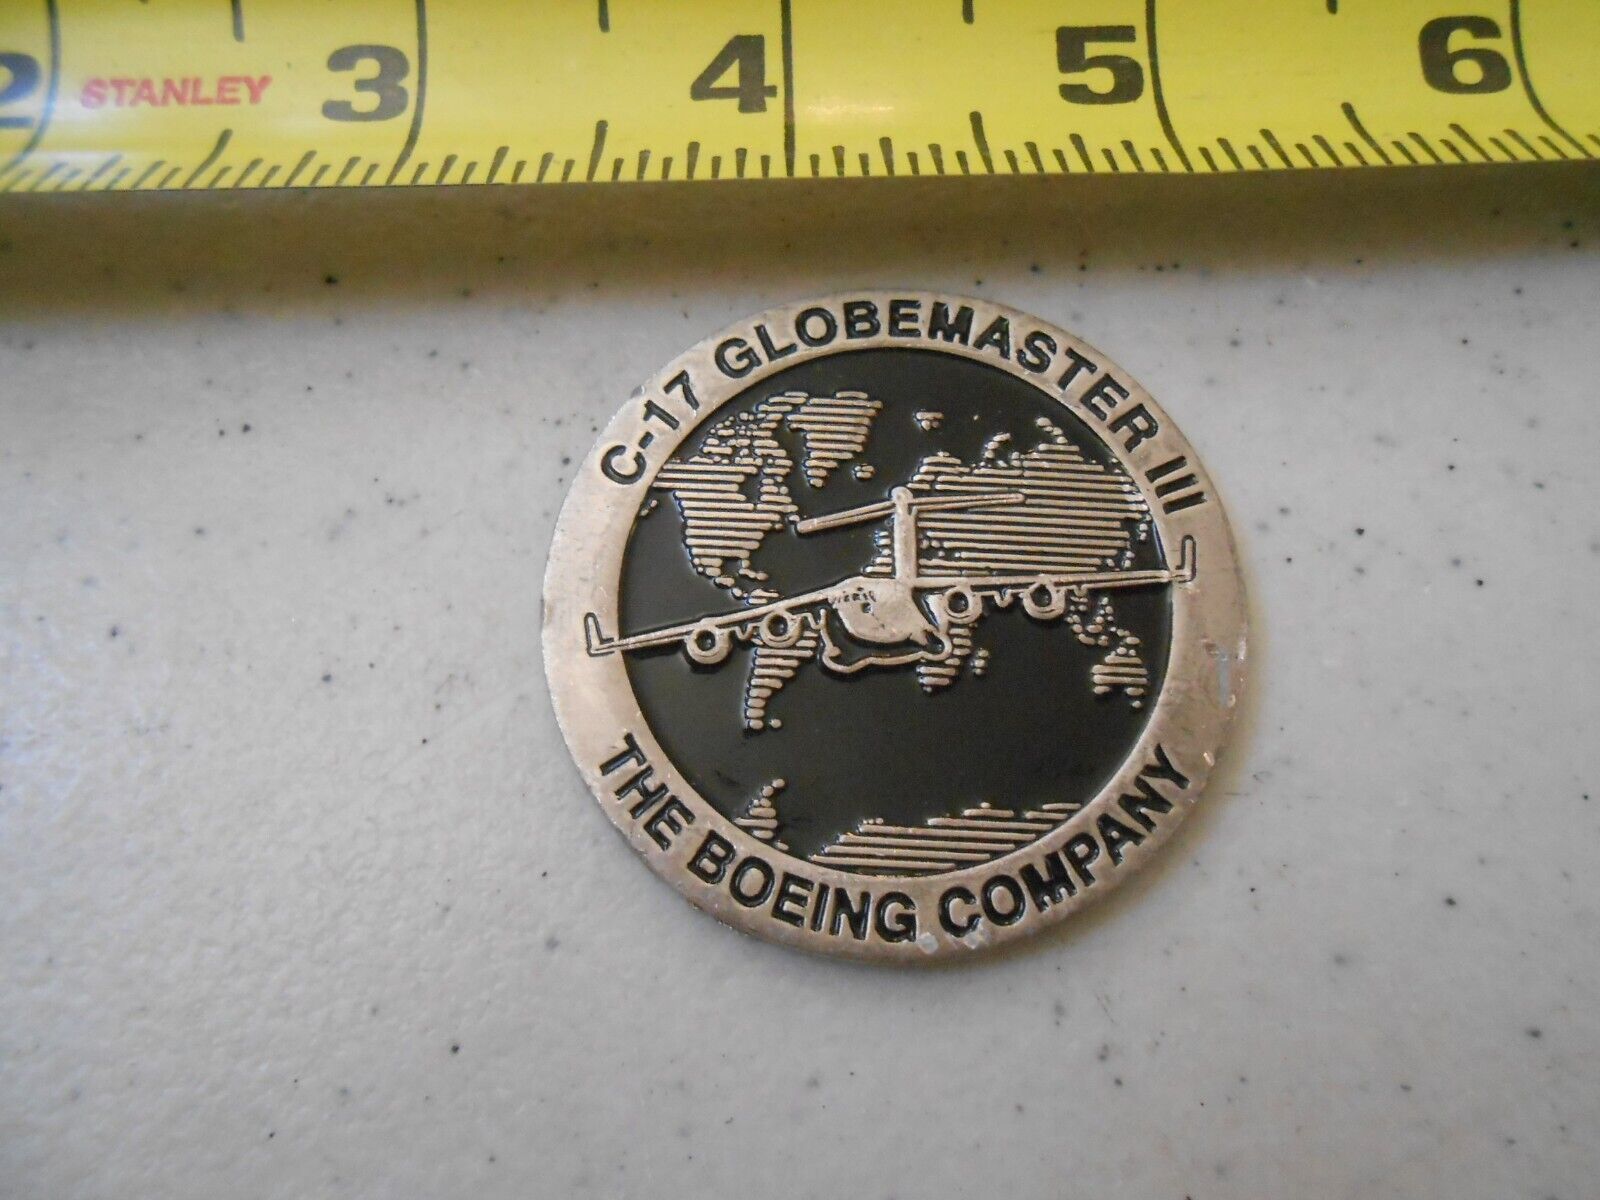 RARE BOEING C-17 GLOBEMASTER III USAF AIR FORCE MILITARY CHALLENGE COIN